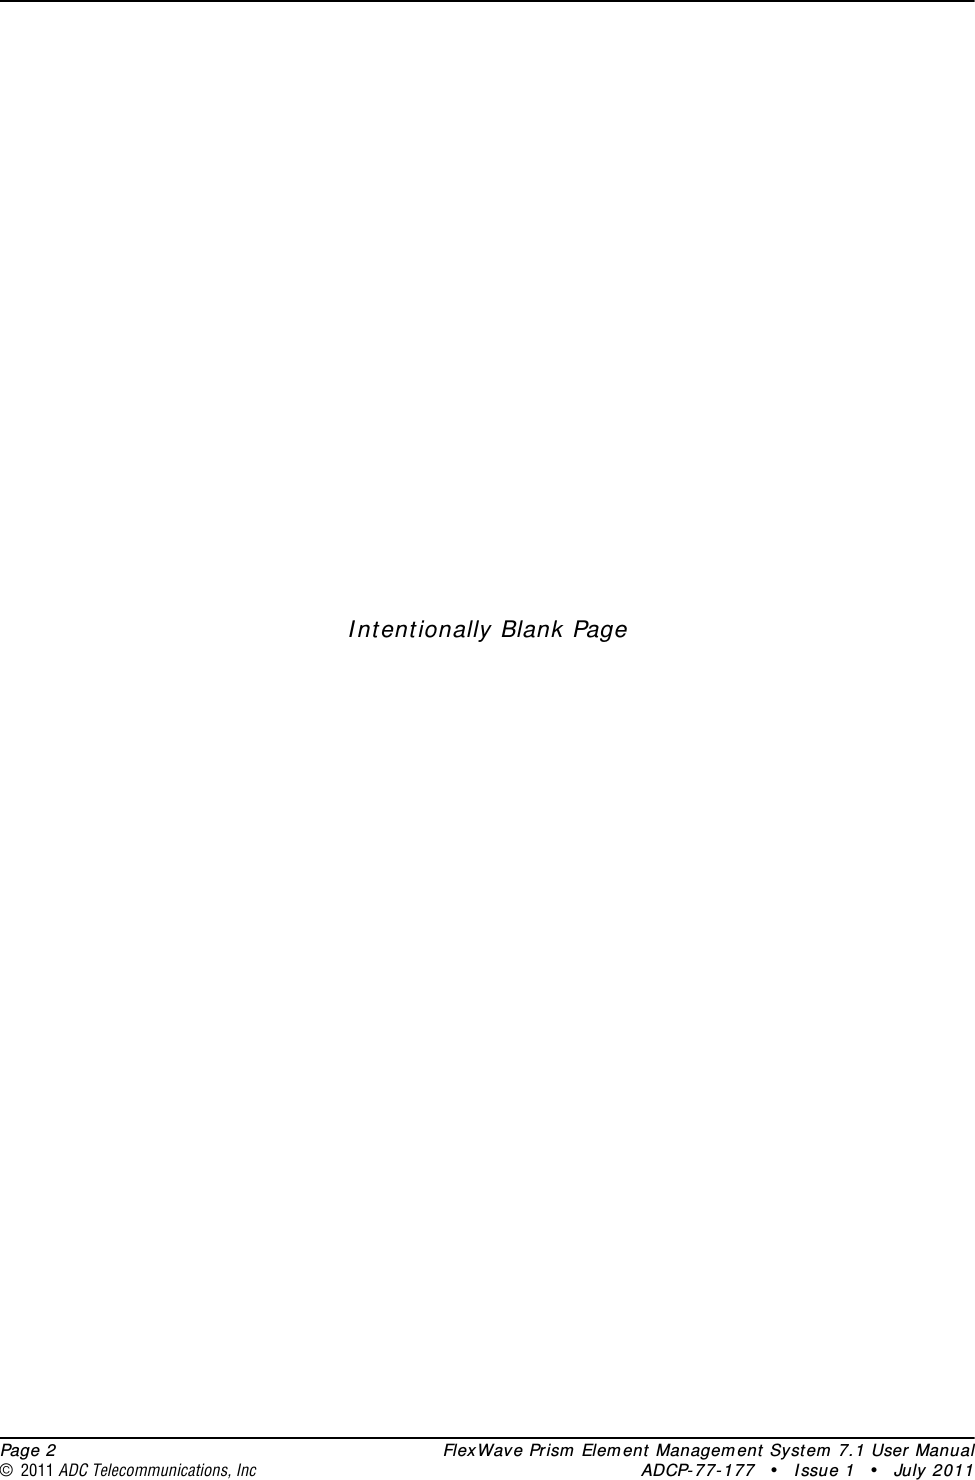  Page 2 FlexWave Prism Element Management System 7.1 User Manual© 2011 ADC Telecommunications, Inc ADCP-77-177 • Issue 1 • July 2011Intentionally Blank Page